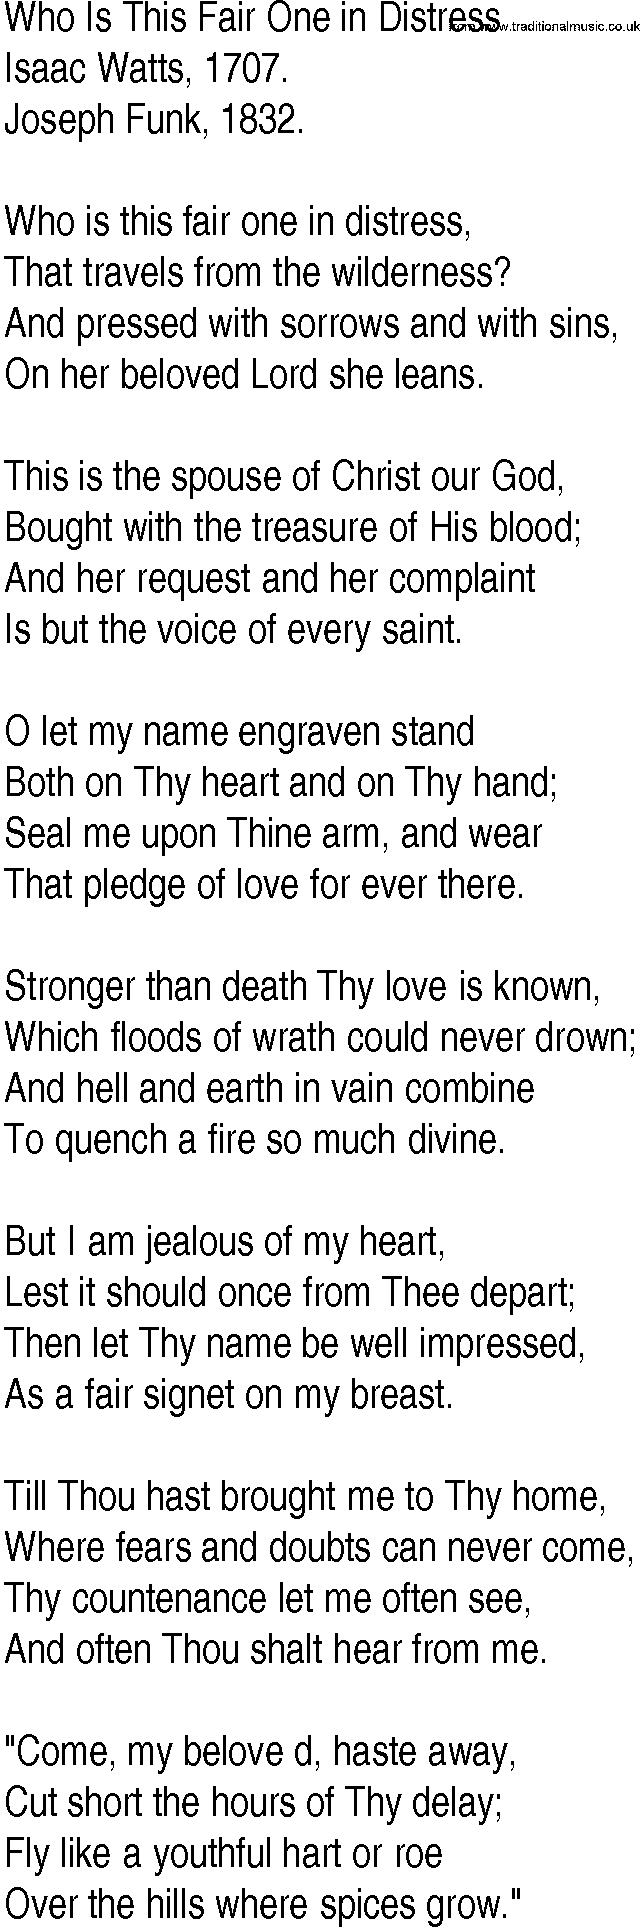 Hymn and Gospel Song: Who Is This Fair One in Distress by Isaac Watts lyrics